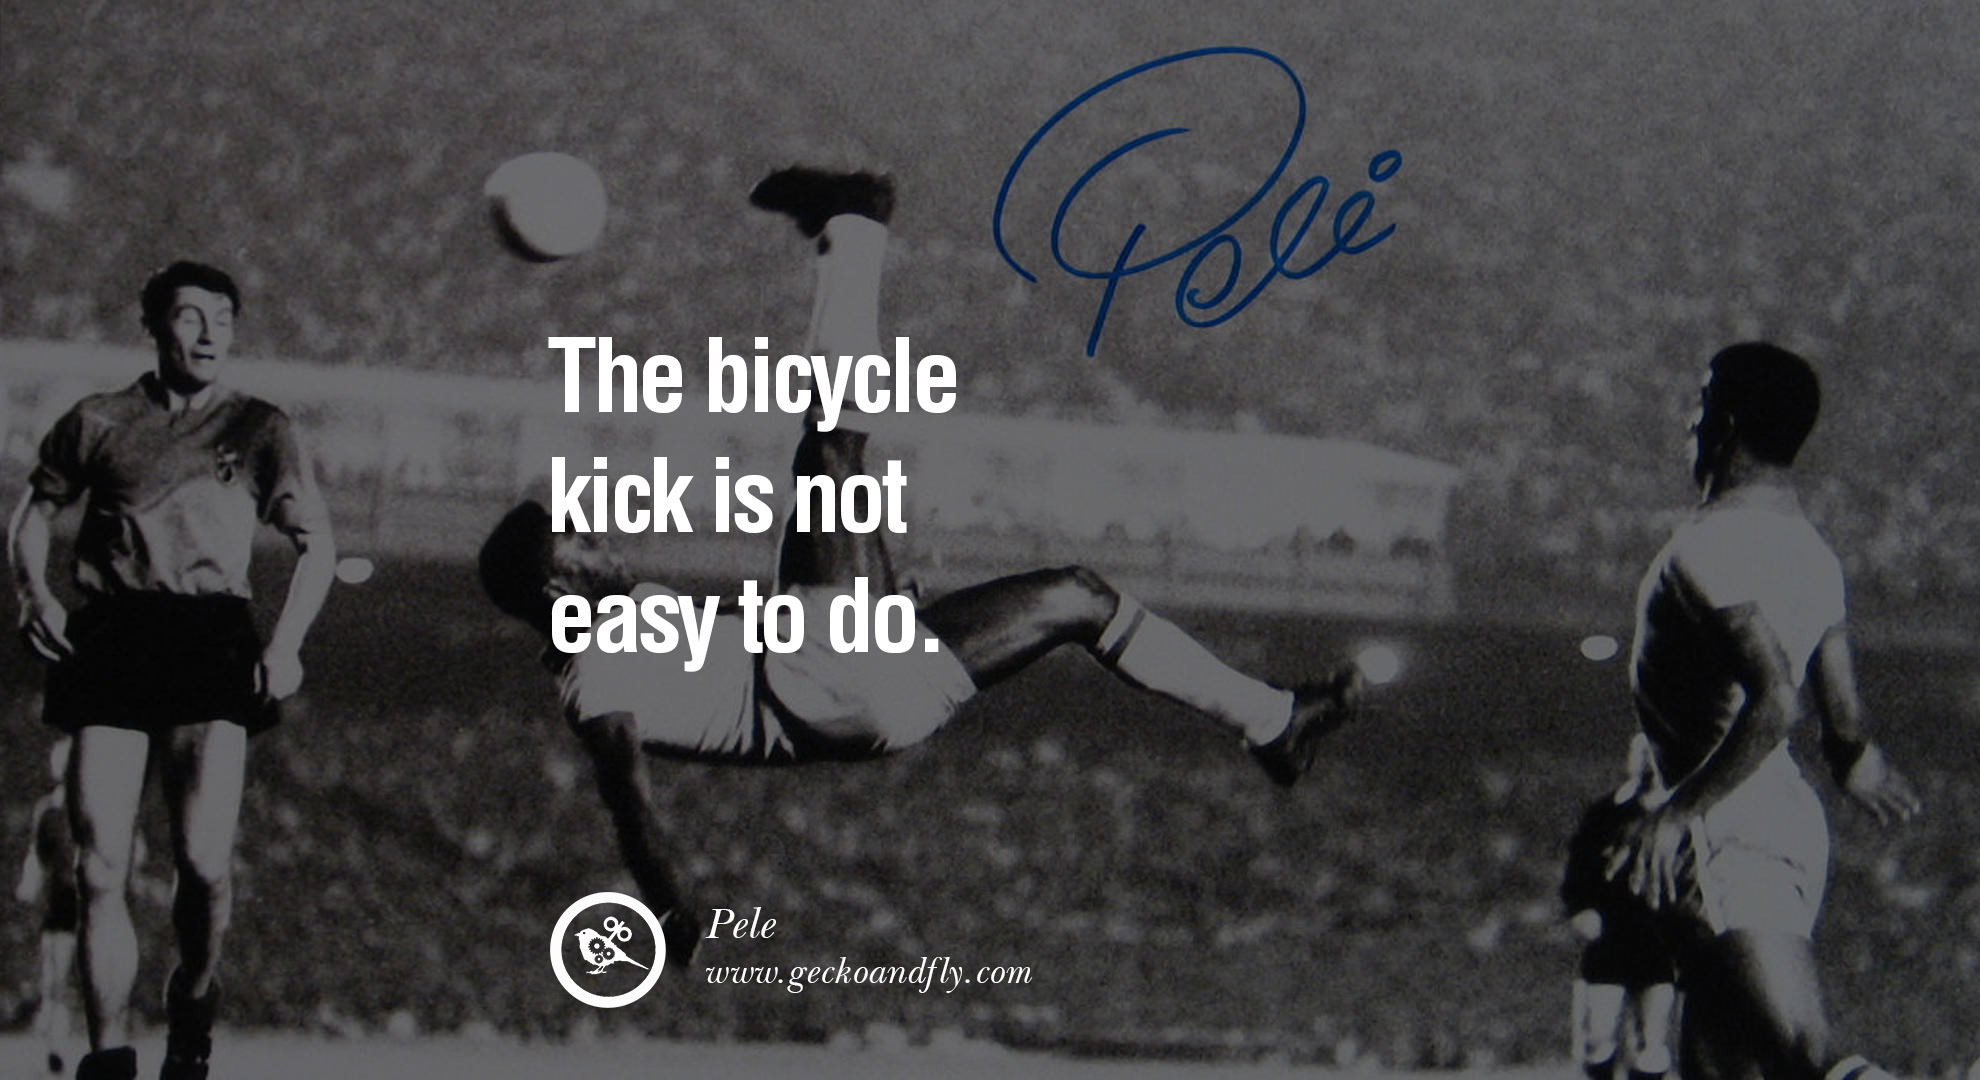 1980x1080 Pele. football fifa brazil world cup 2014 The bicycle kick is not easy to  do. -